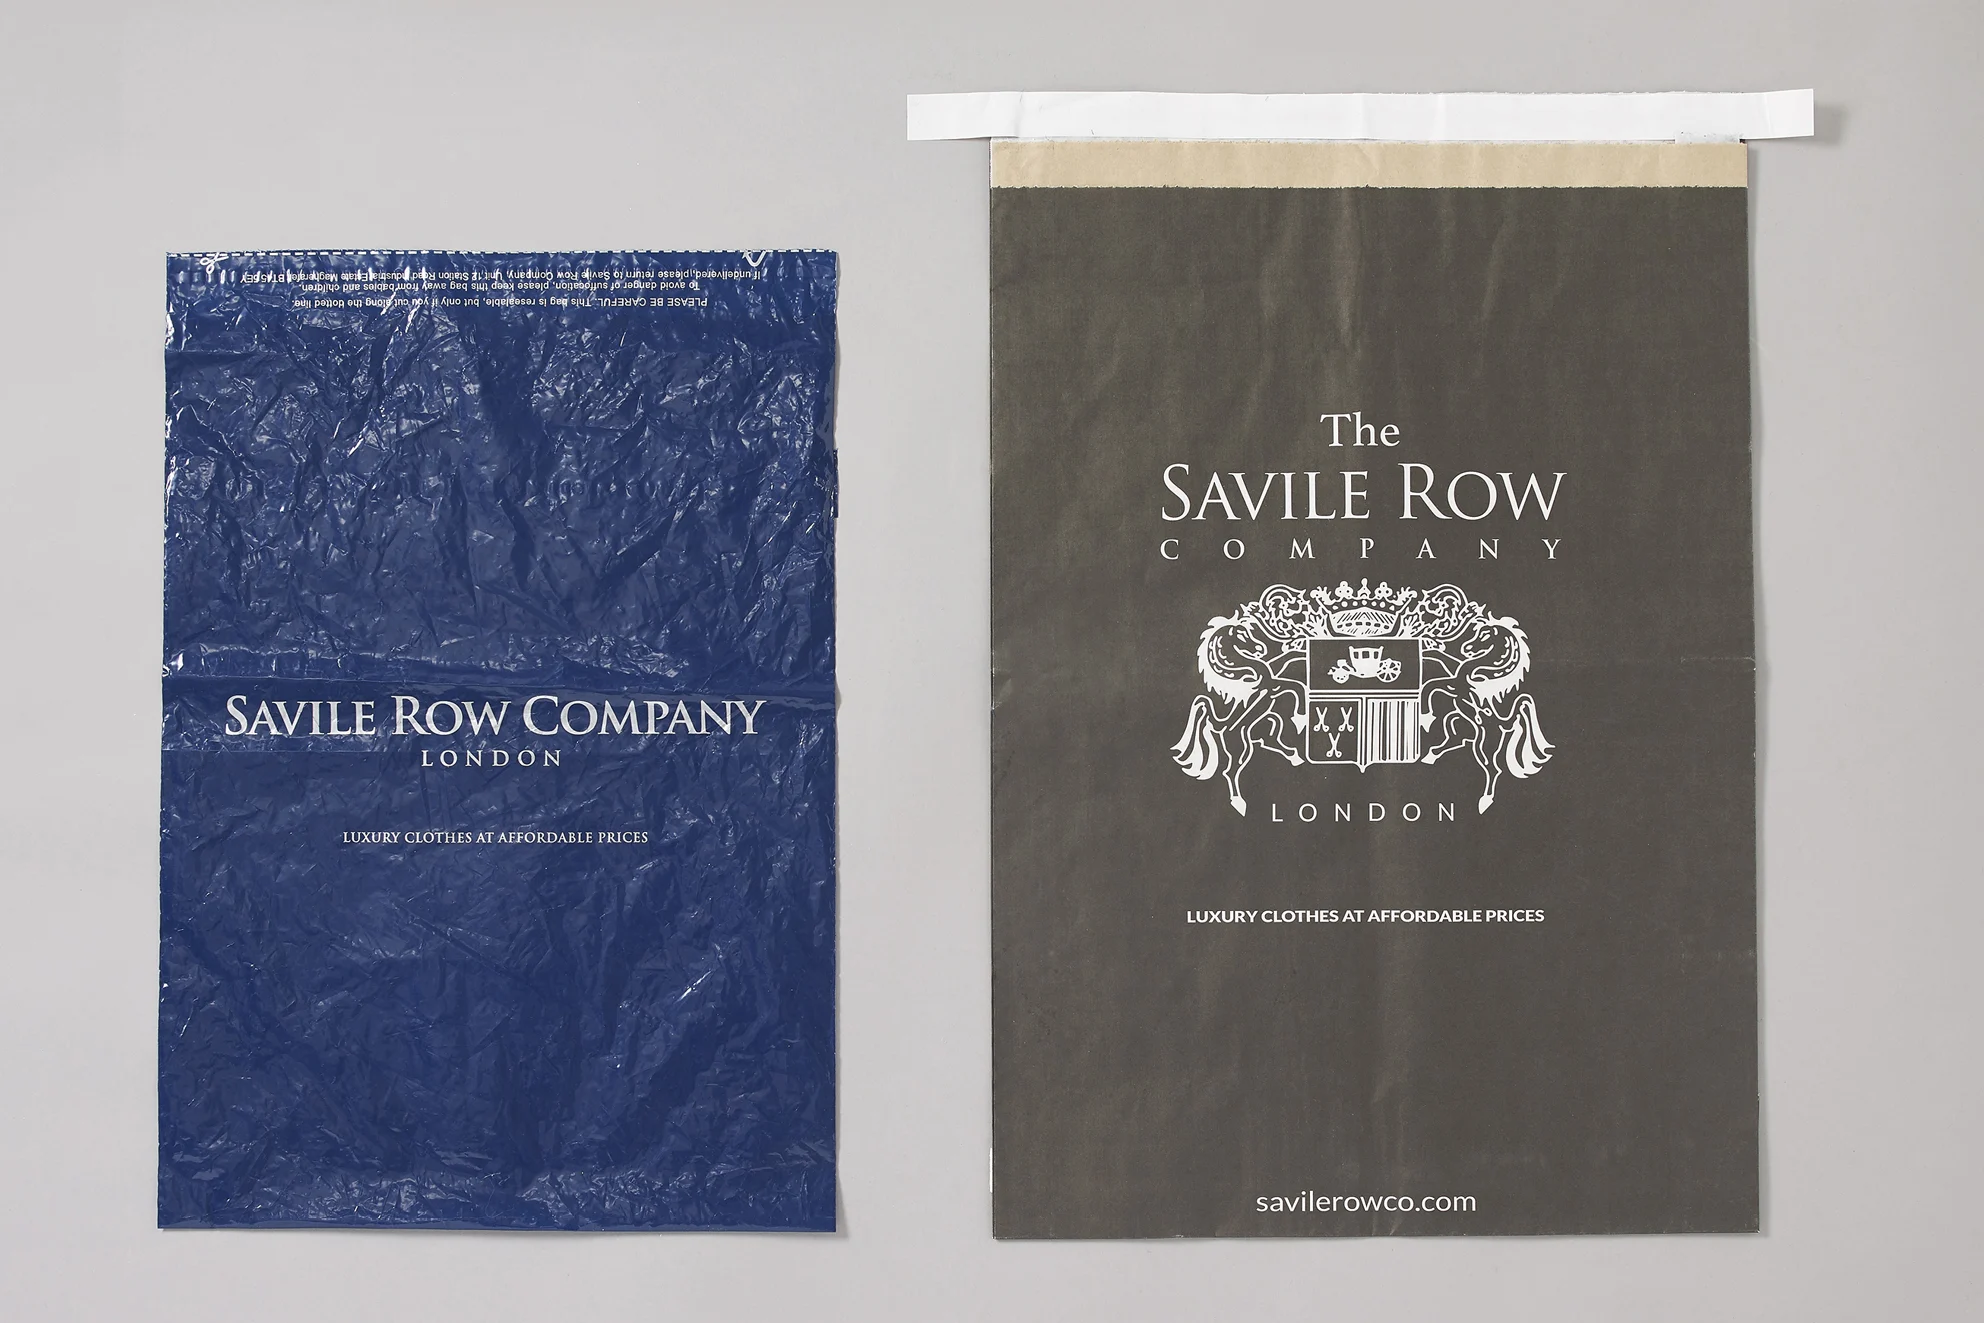 The Savile Row Company has replaced plastic packaging (left) with a recyclable paper bag (right).